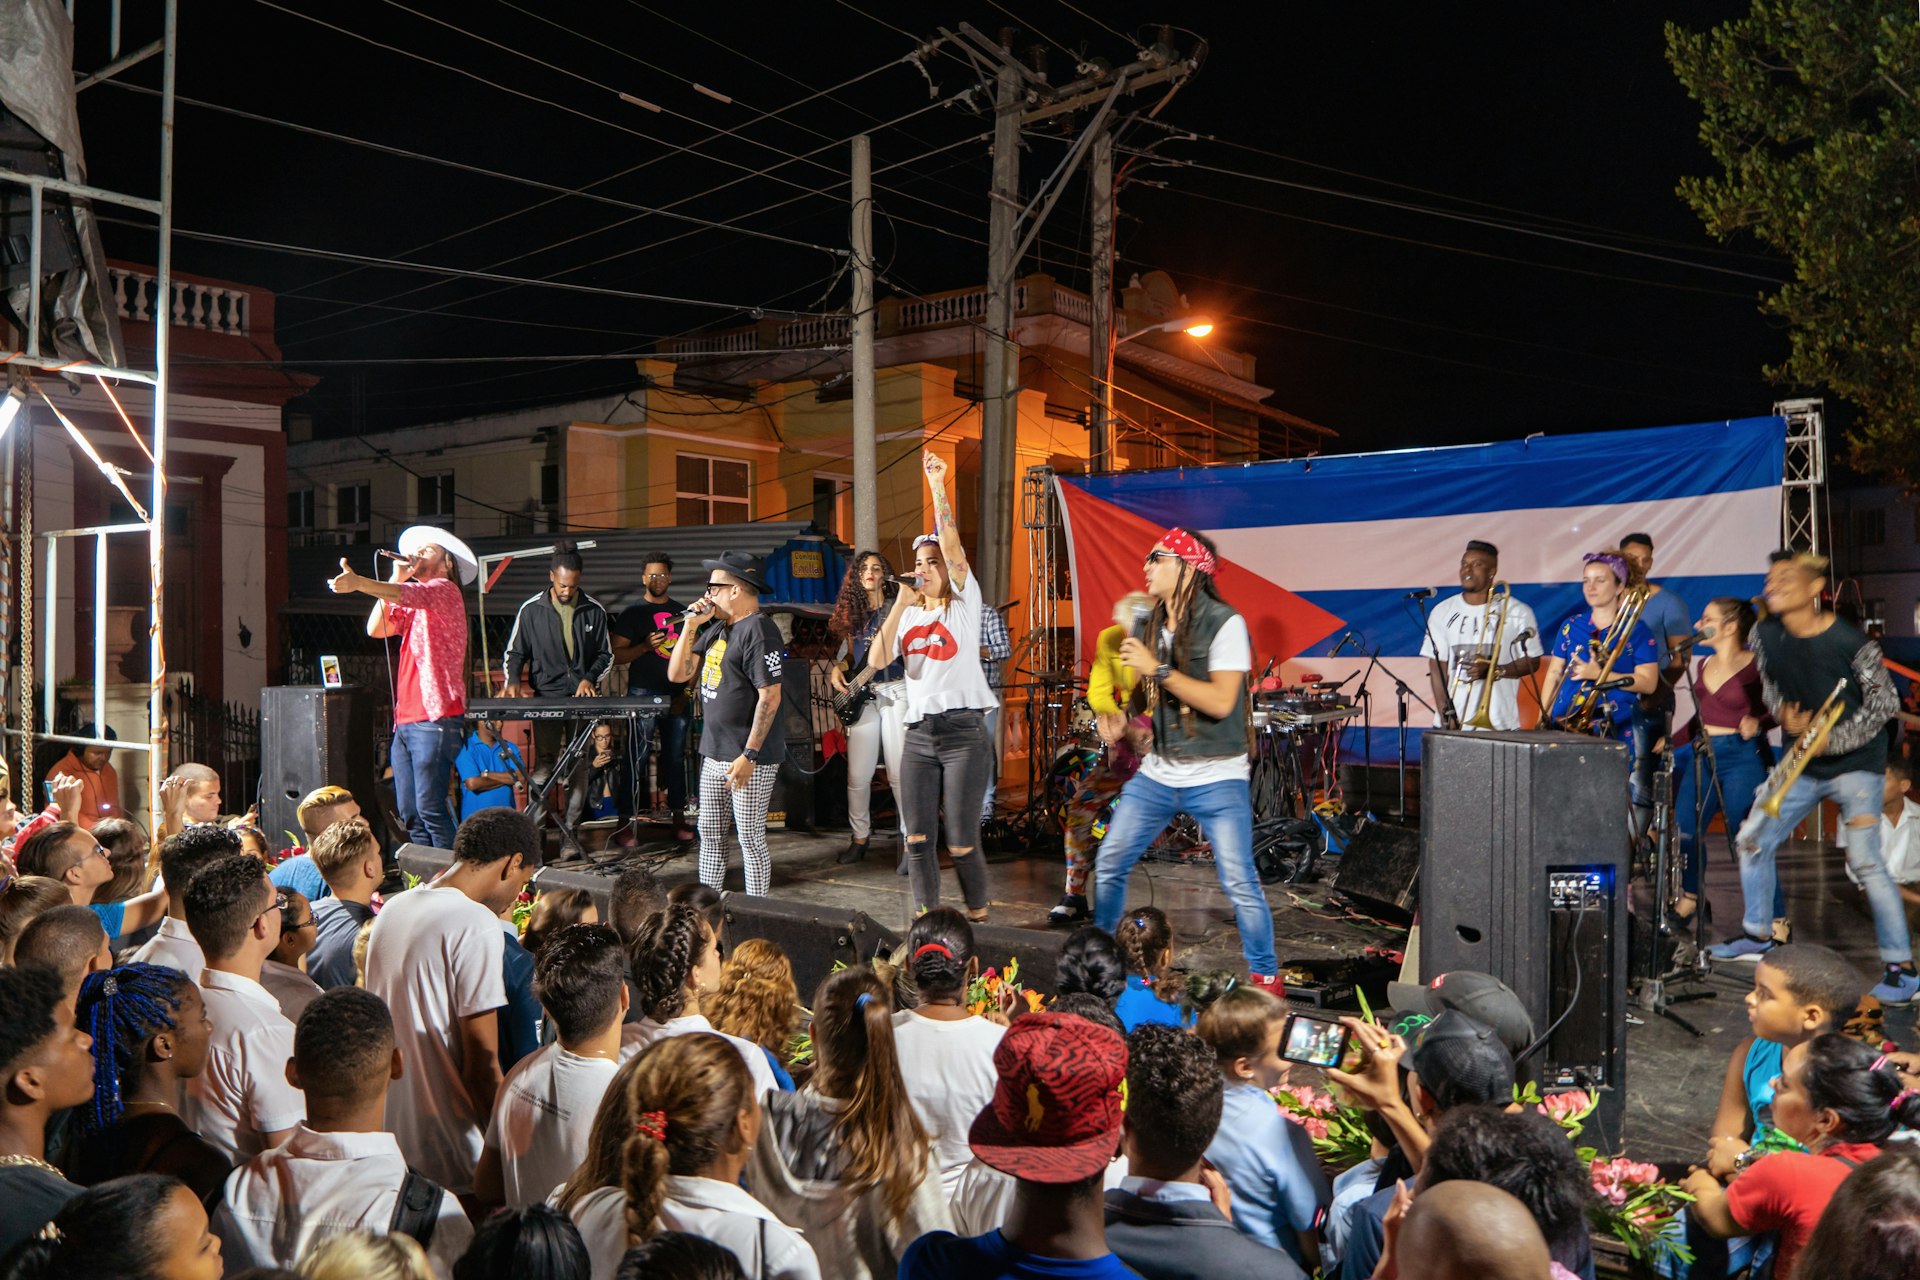 Performers on stage play to a crowd in front of a Cuban flag